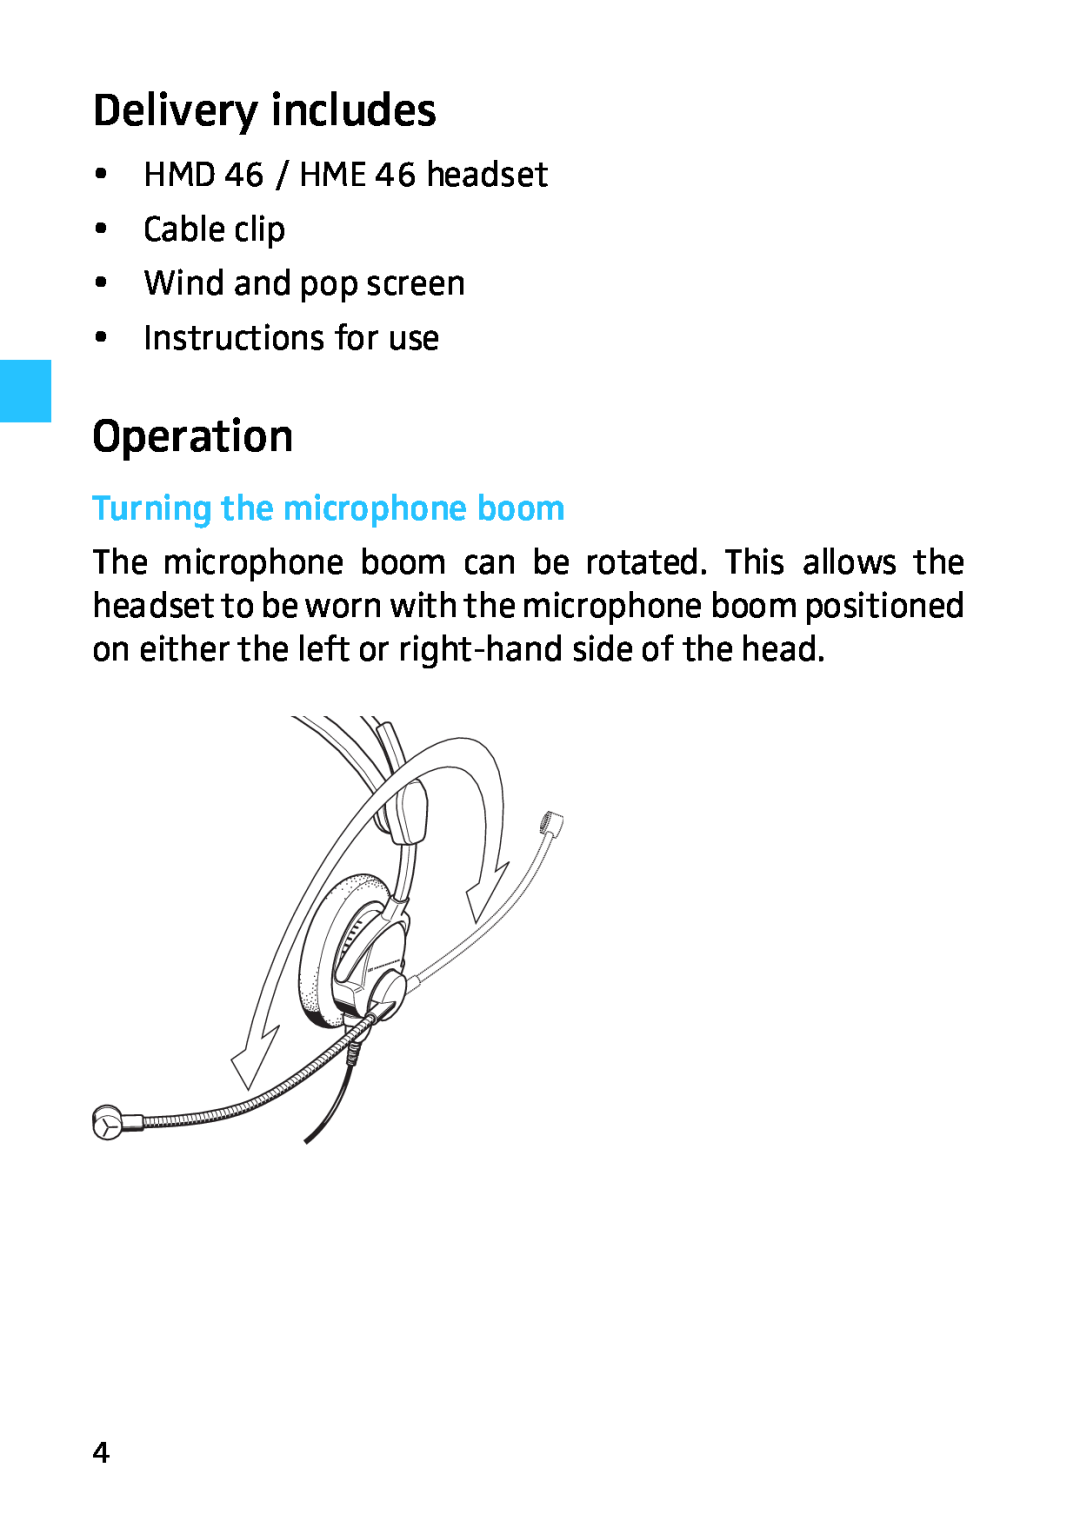 Sennheiser manual Delivery includes, Operation, Turning the microphone boom, yHMD 46 / HME 46 headset yCable clip 